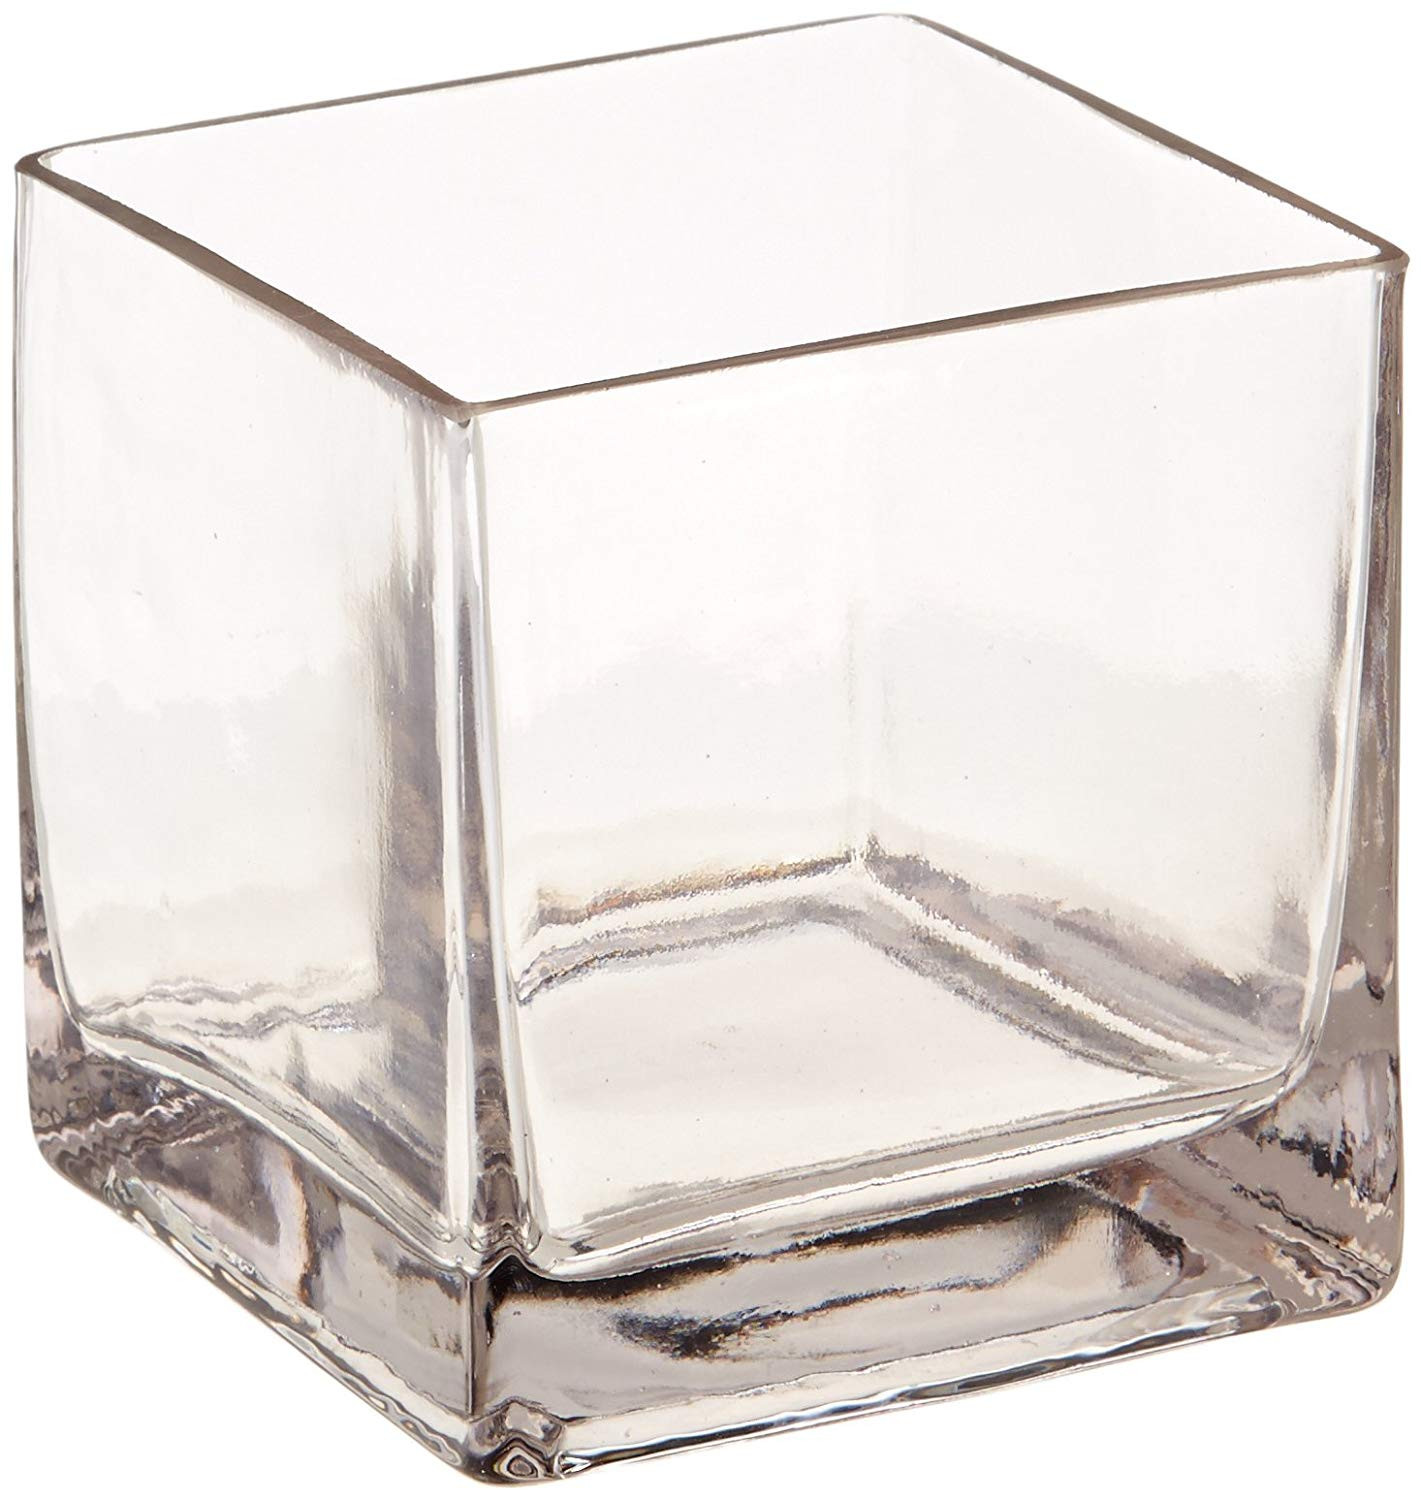 24 Fabulous 5 Inch Glass Cylinder Vase 2024 free download 5 inch glass cylinder vase of amazon com 12piece 4 square crystal clear glass vase home kitchen in 71 jezfmvnl sl1500